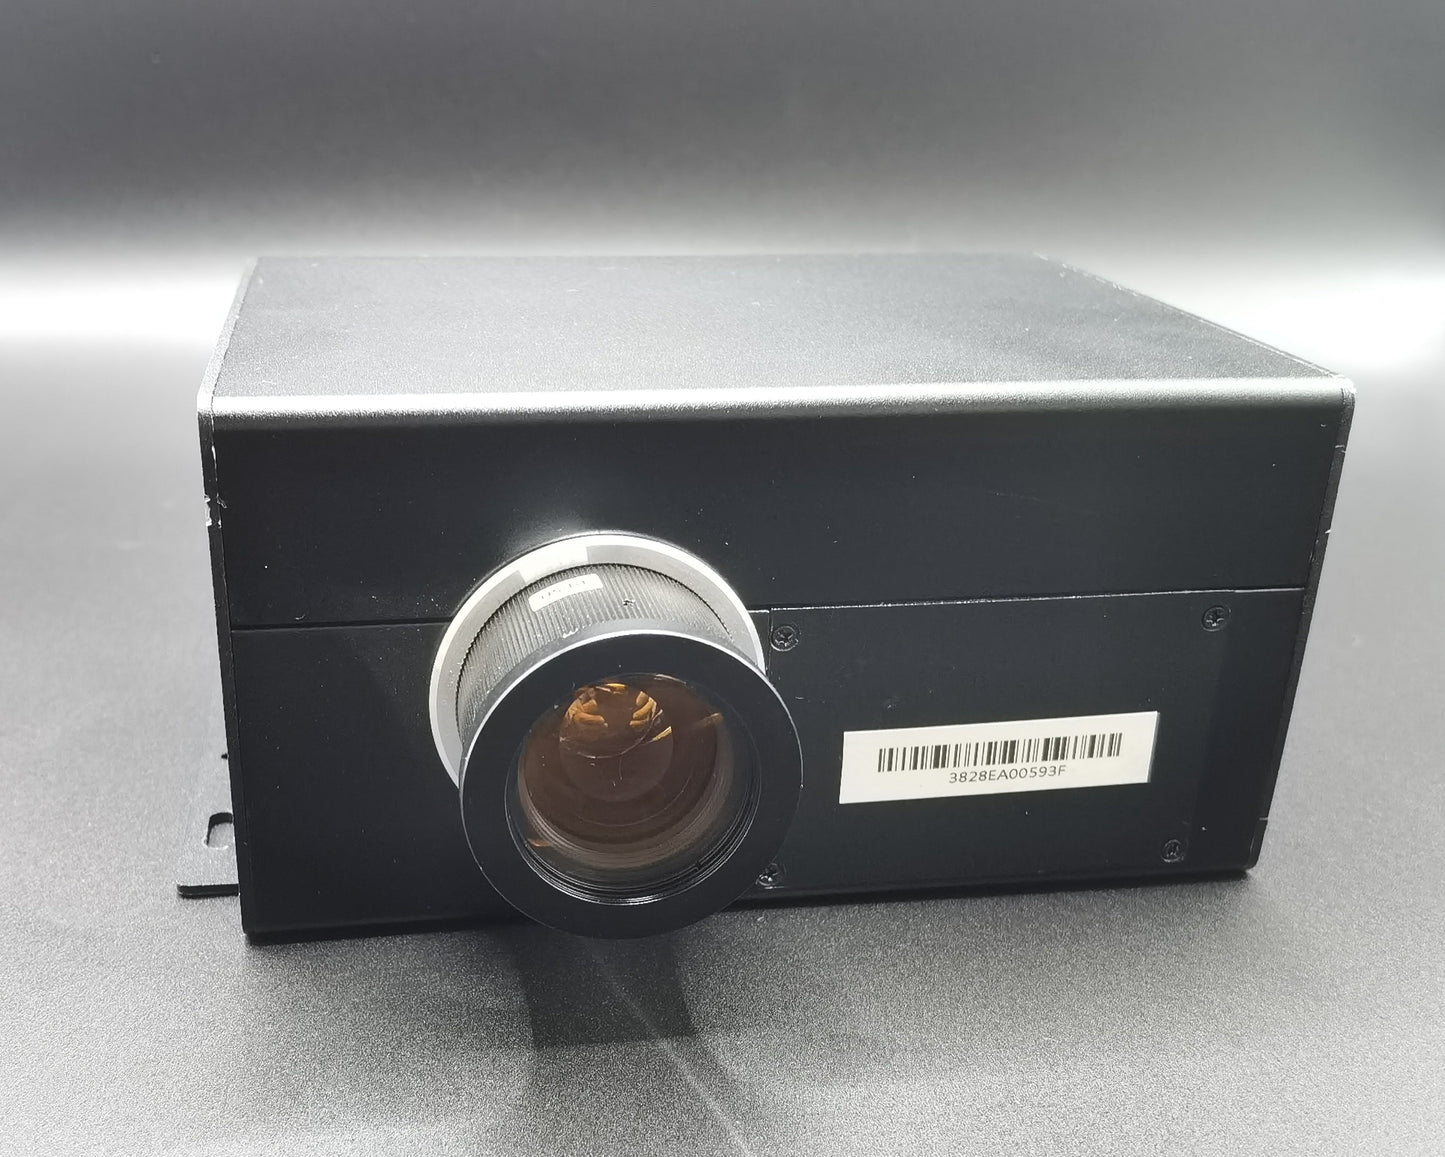 SM9 1080P High Power UV DLP Projector for Resin 3D Printing